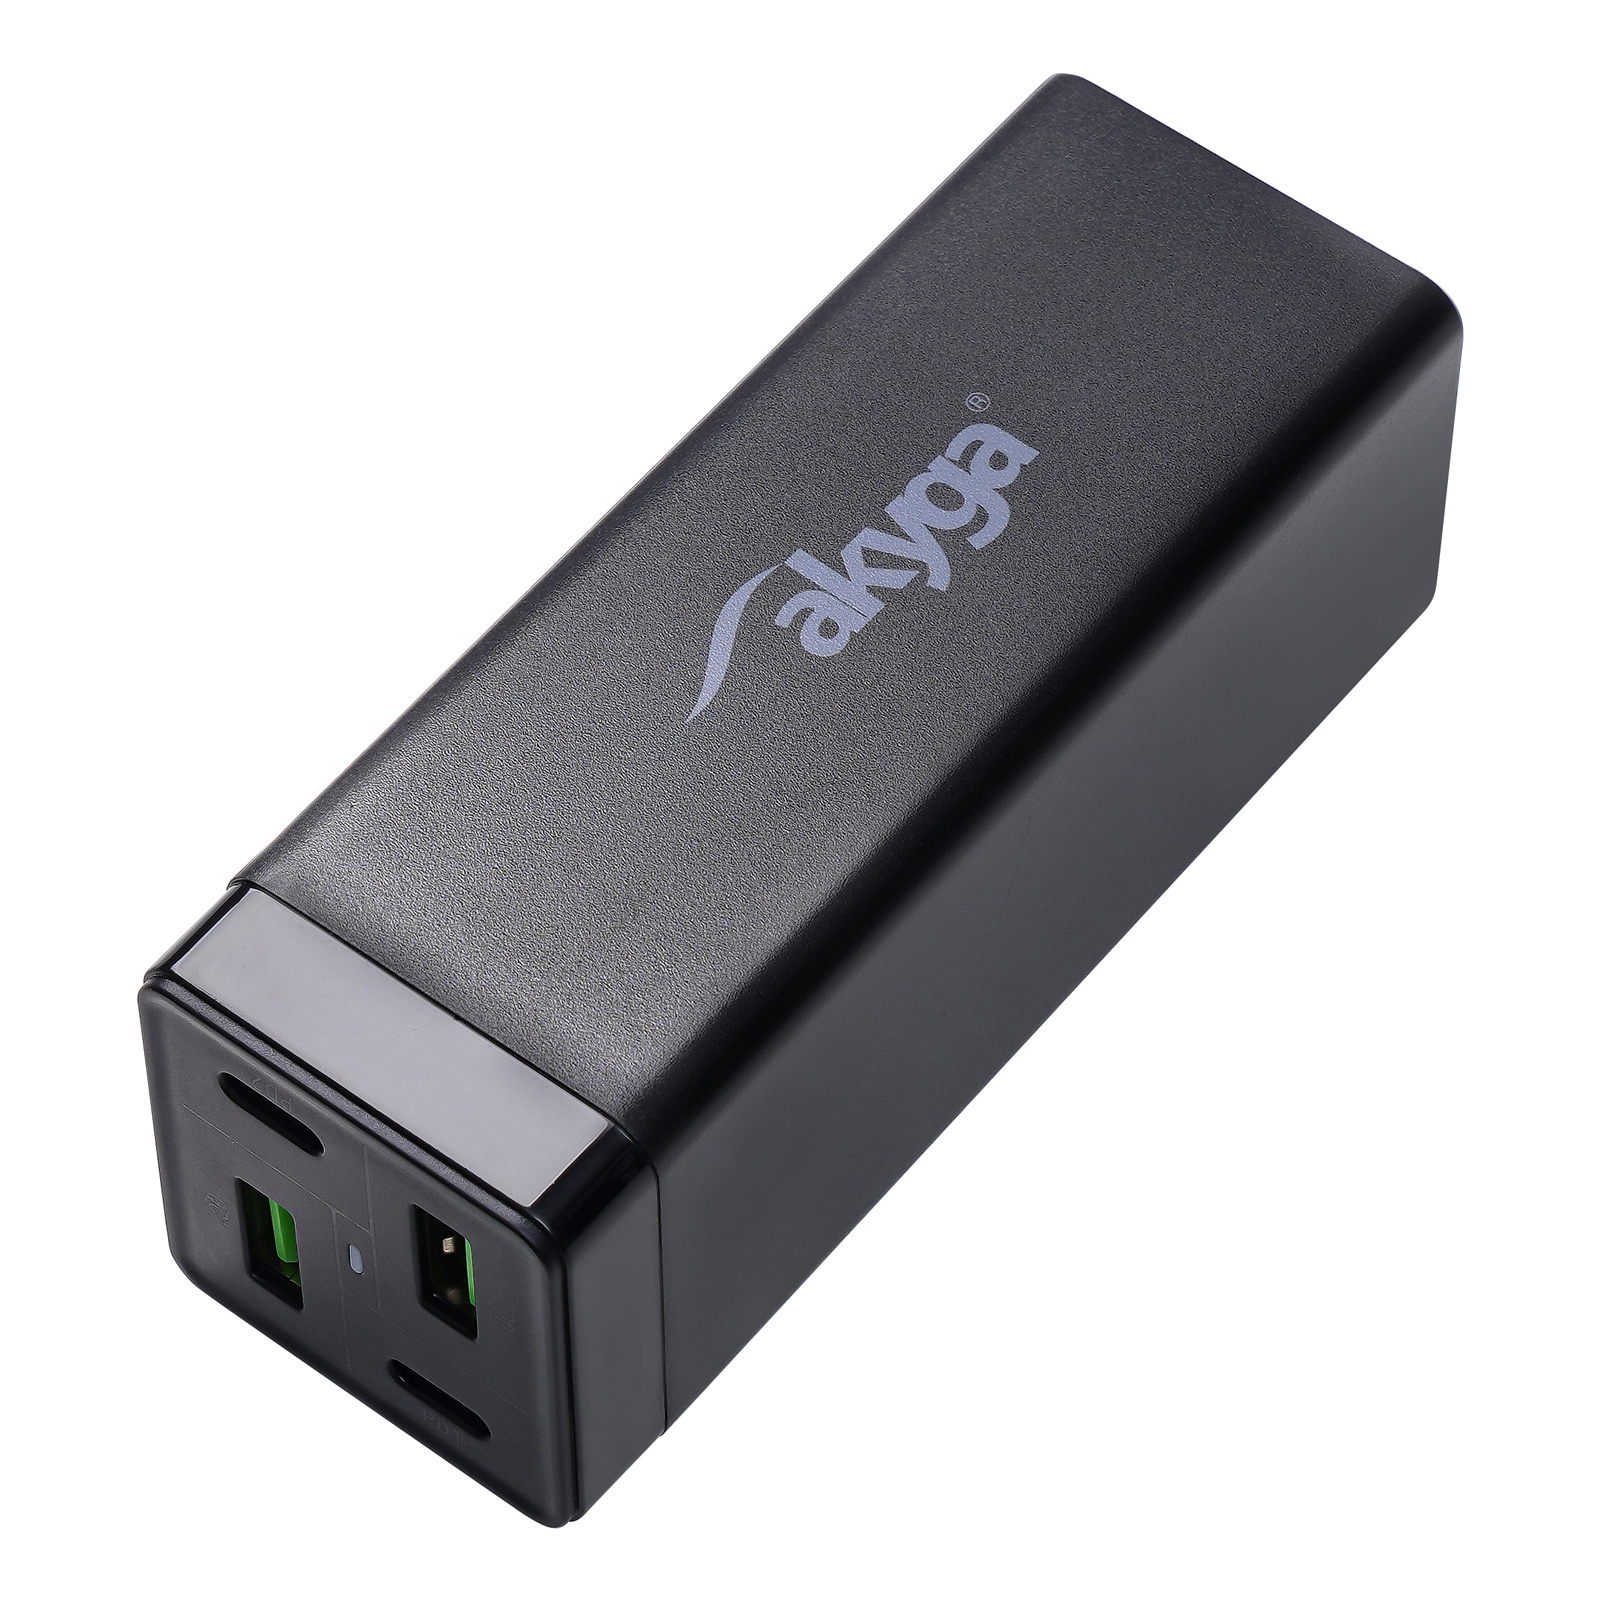 Main image USB Charger AK-CH-17 Charge Brick 2x USB-A + 2x USB-C PD 5-20 V / max 3.25A 65W Quick Charge 4+